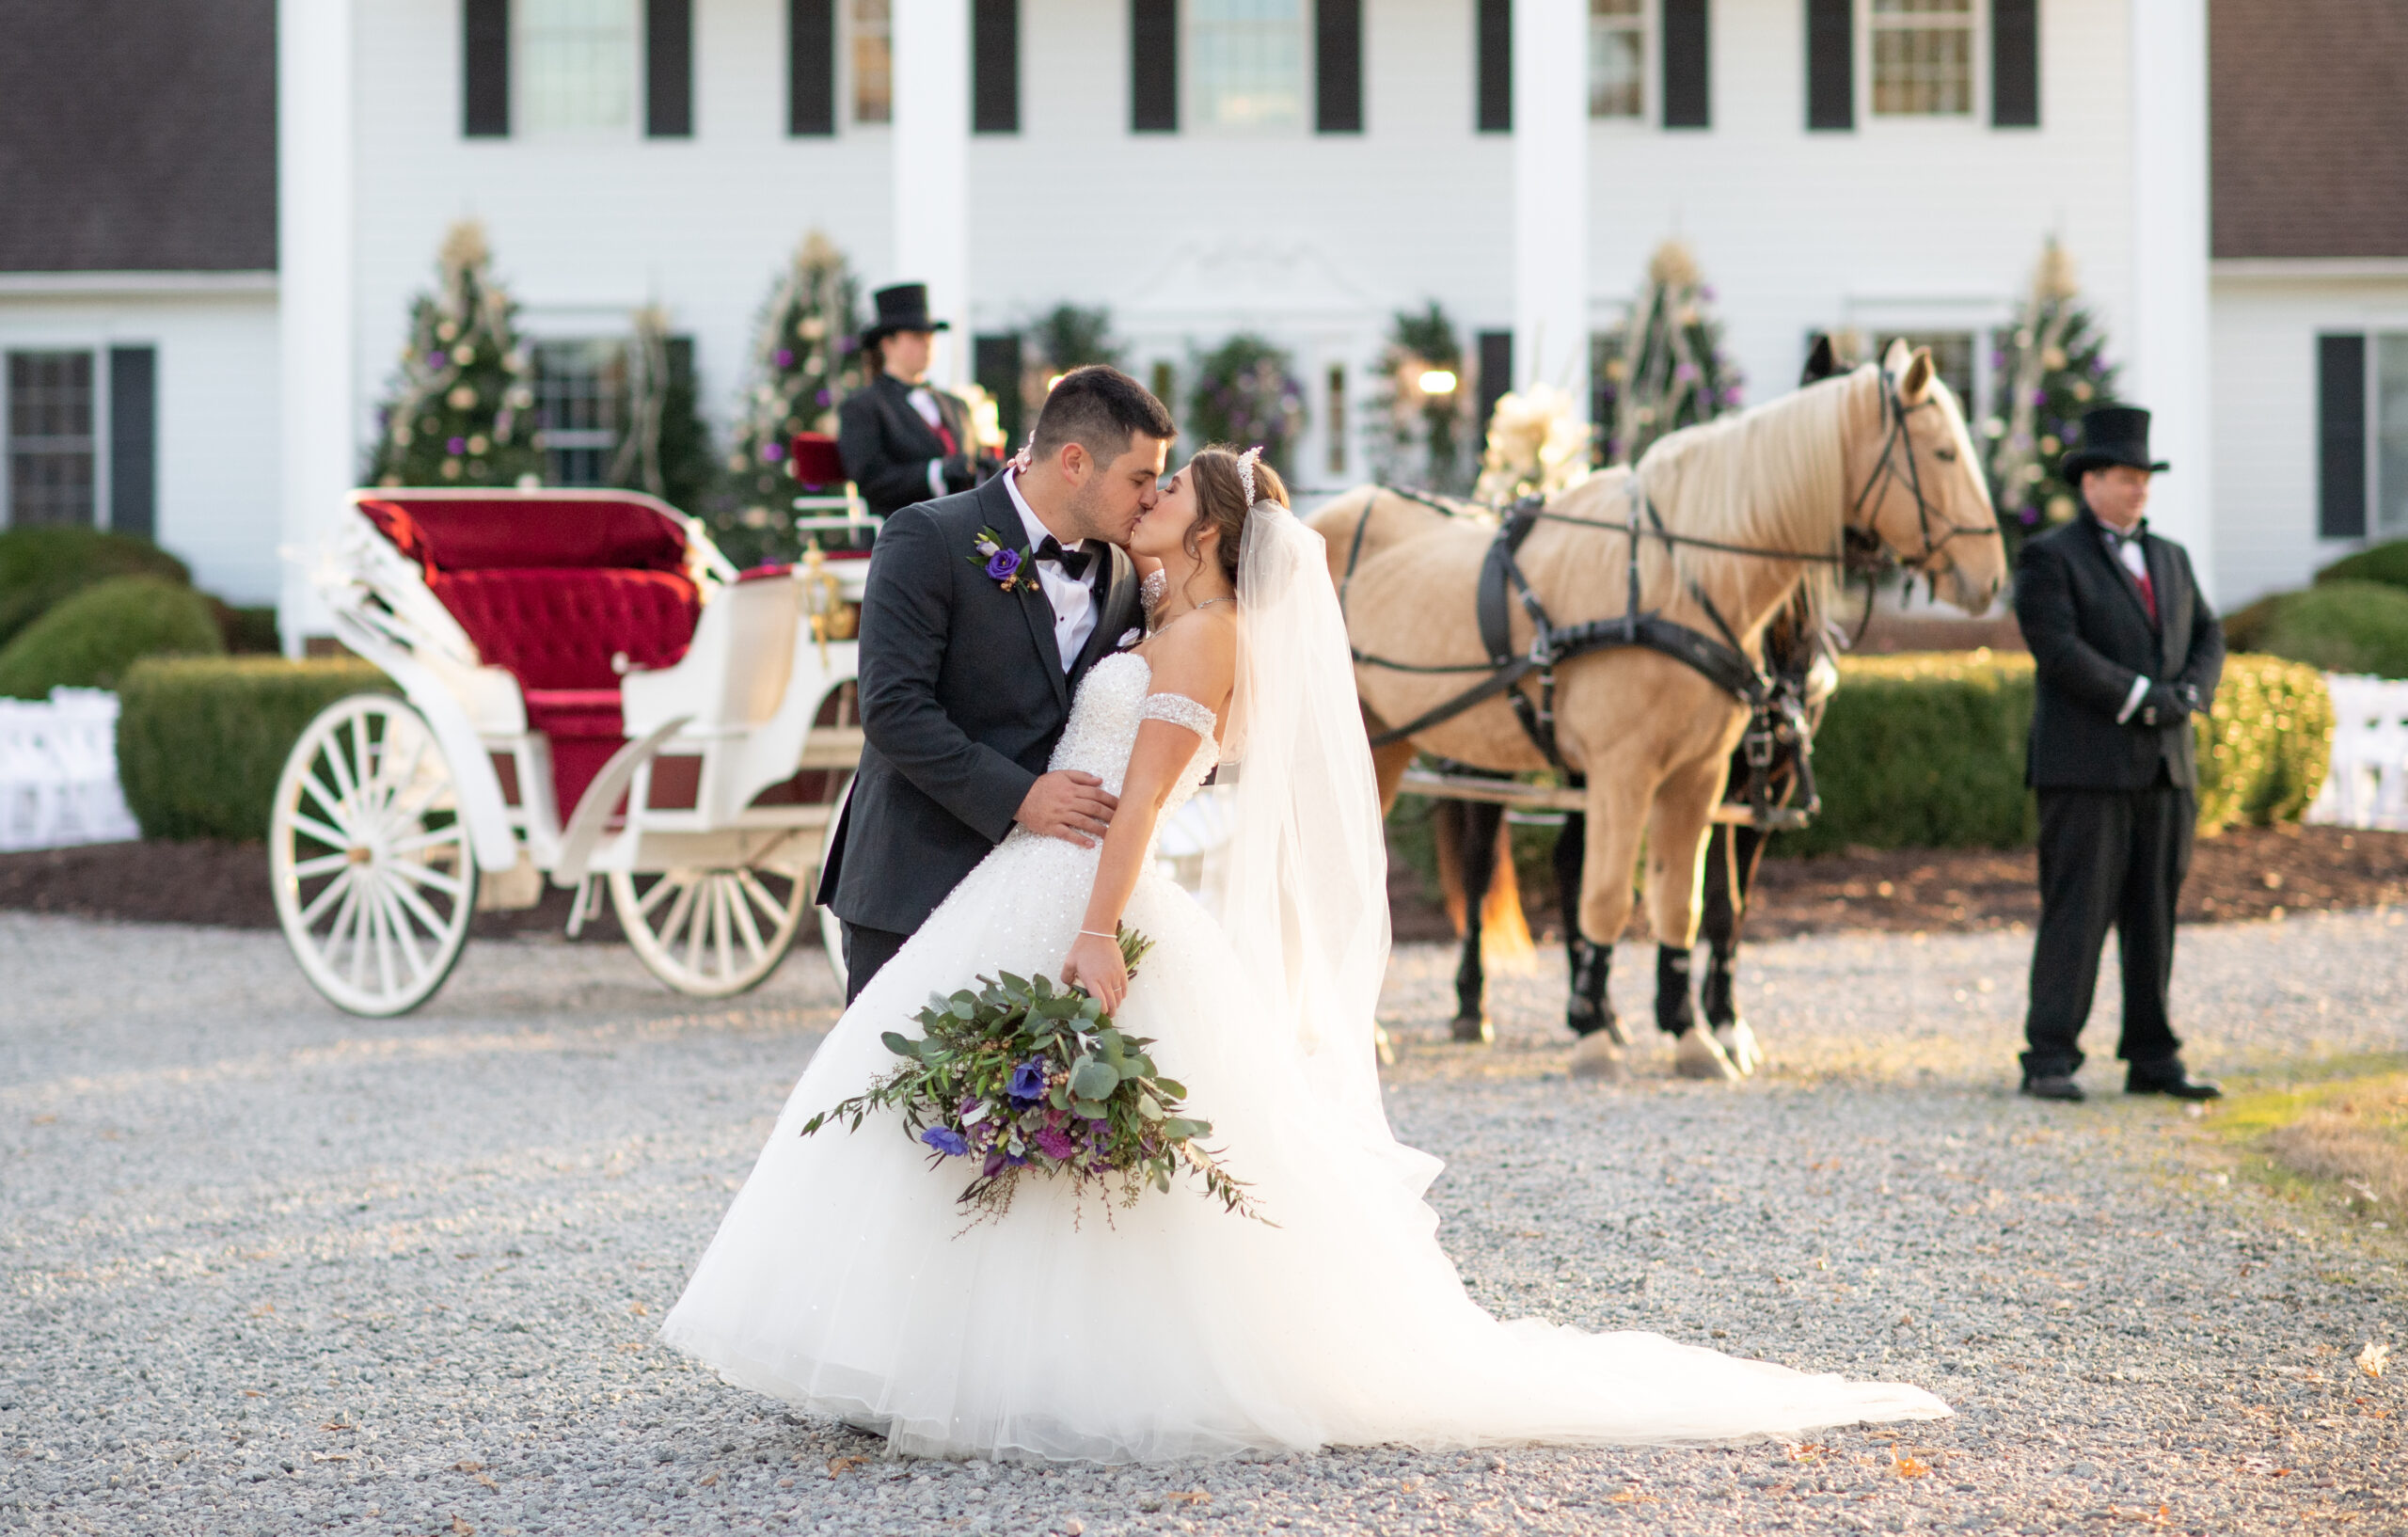 Bride and Groom kiss in front of horse drawn carriage in Gates County, NC.